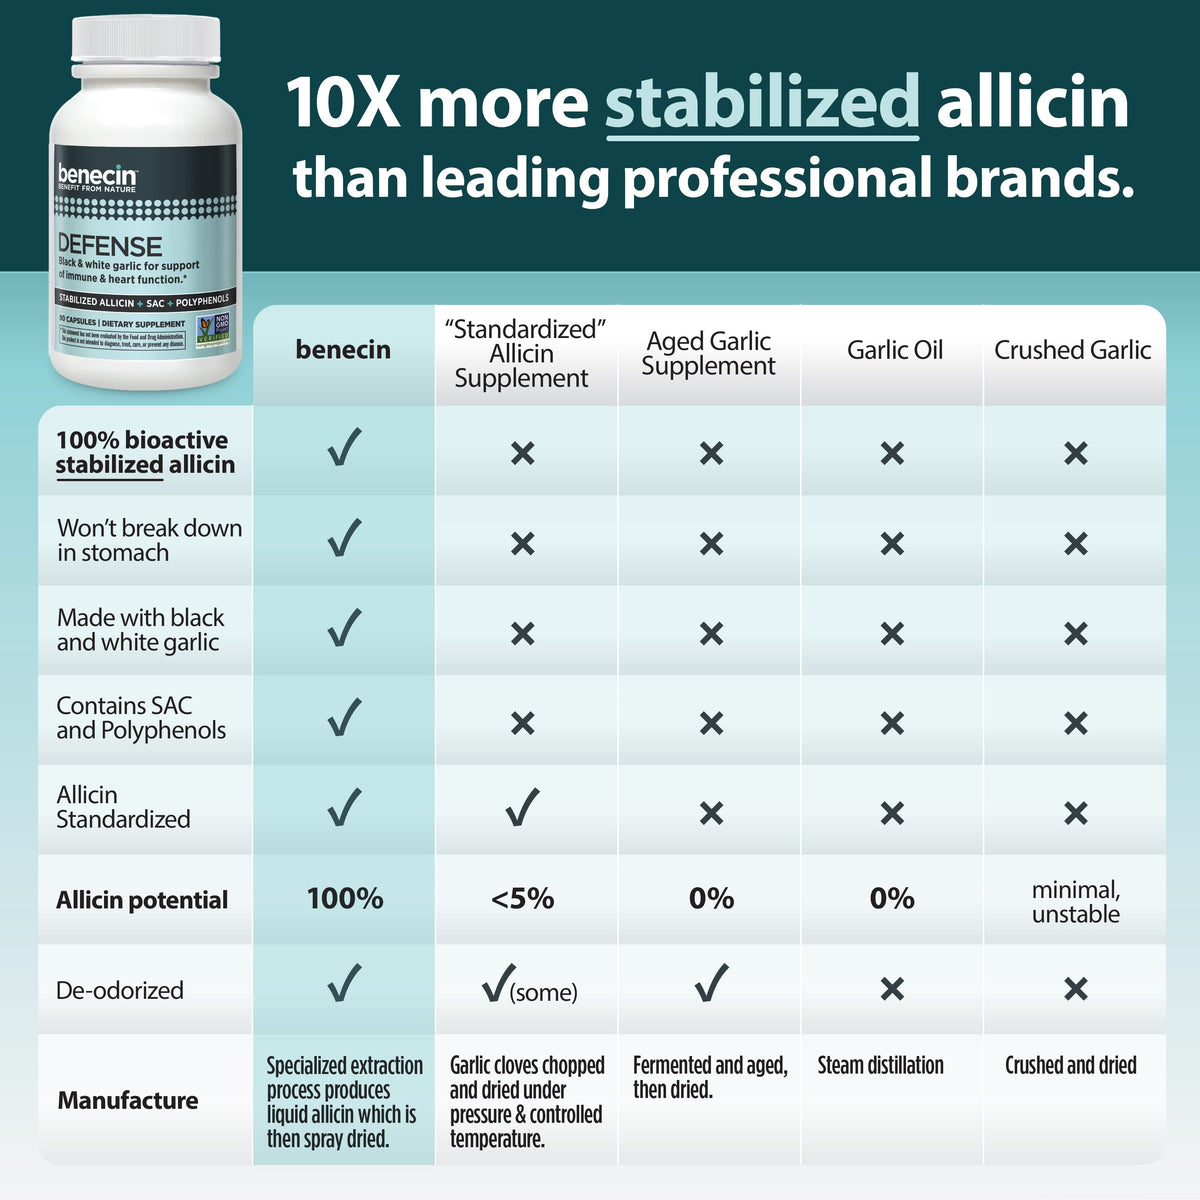 Chart comparing the benefits of benecin defence against so called stabilized allicin supplements, aged garlic supplements, garlic oil, and crushed garlic. Only benecin has 100% bioactive stabilized allicin that won't break down in the stomach.